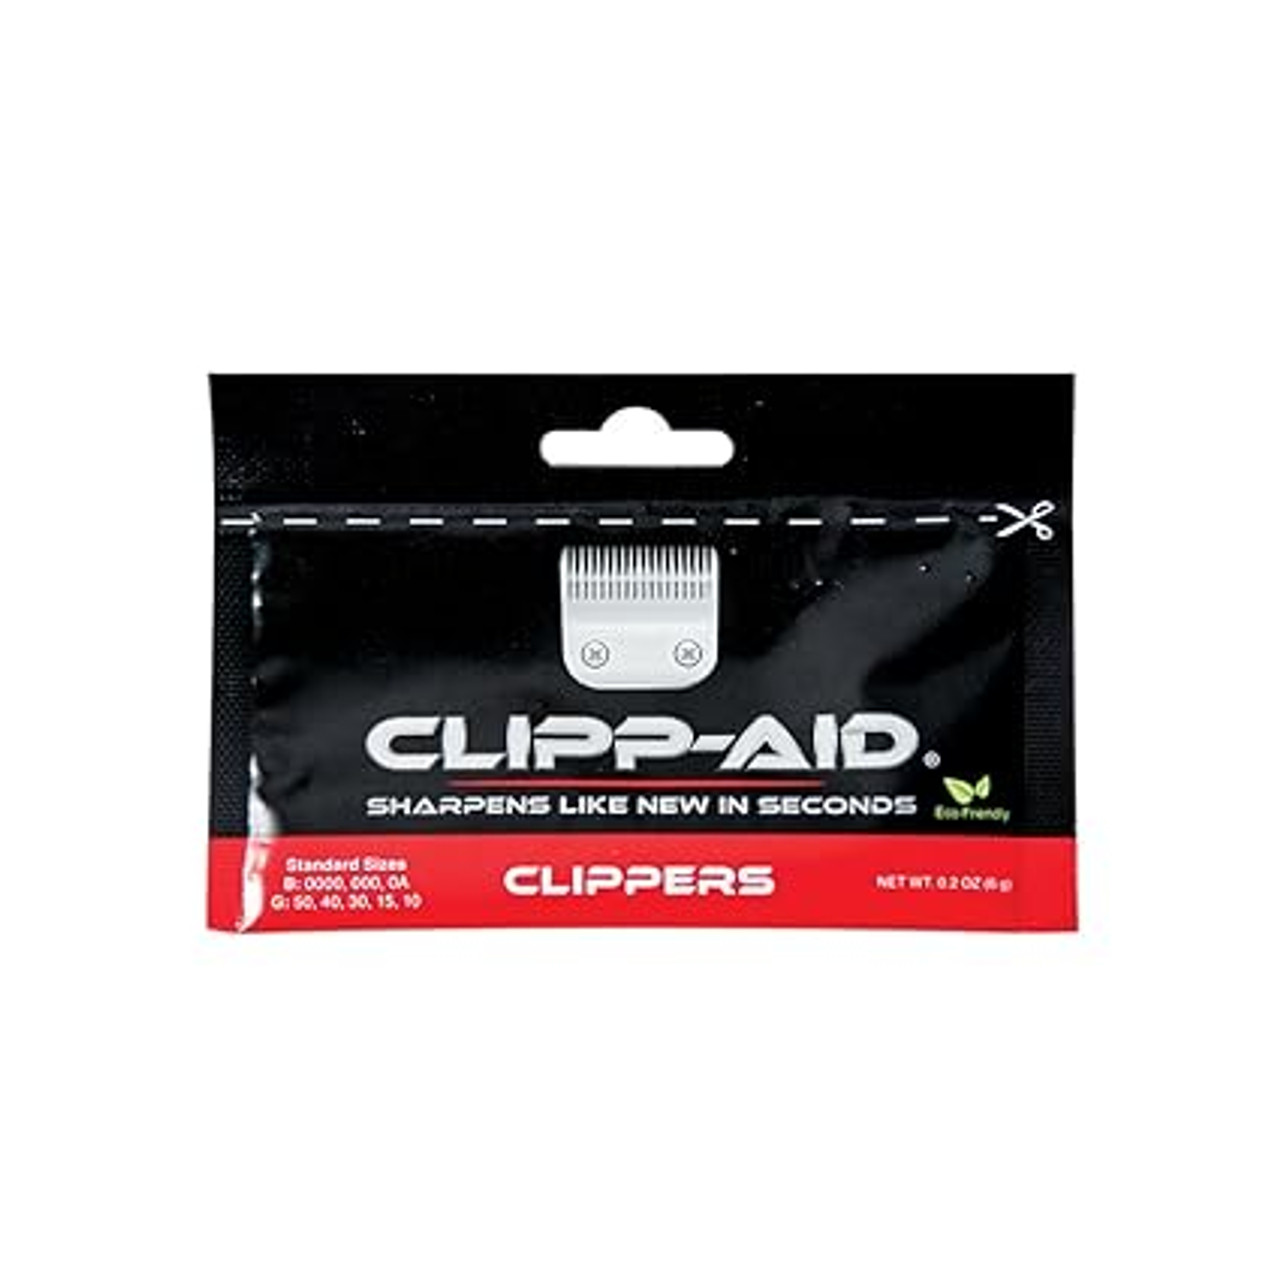 CLIPP-AID Sharpening Crystals For Clippers – WOWU Supplies